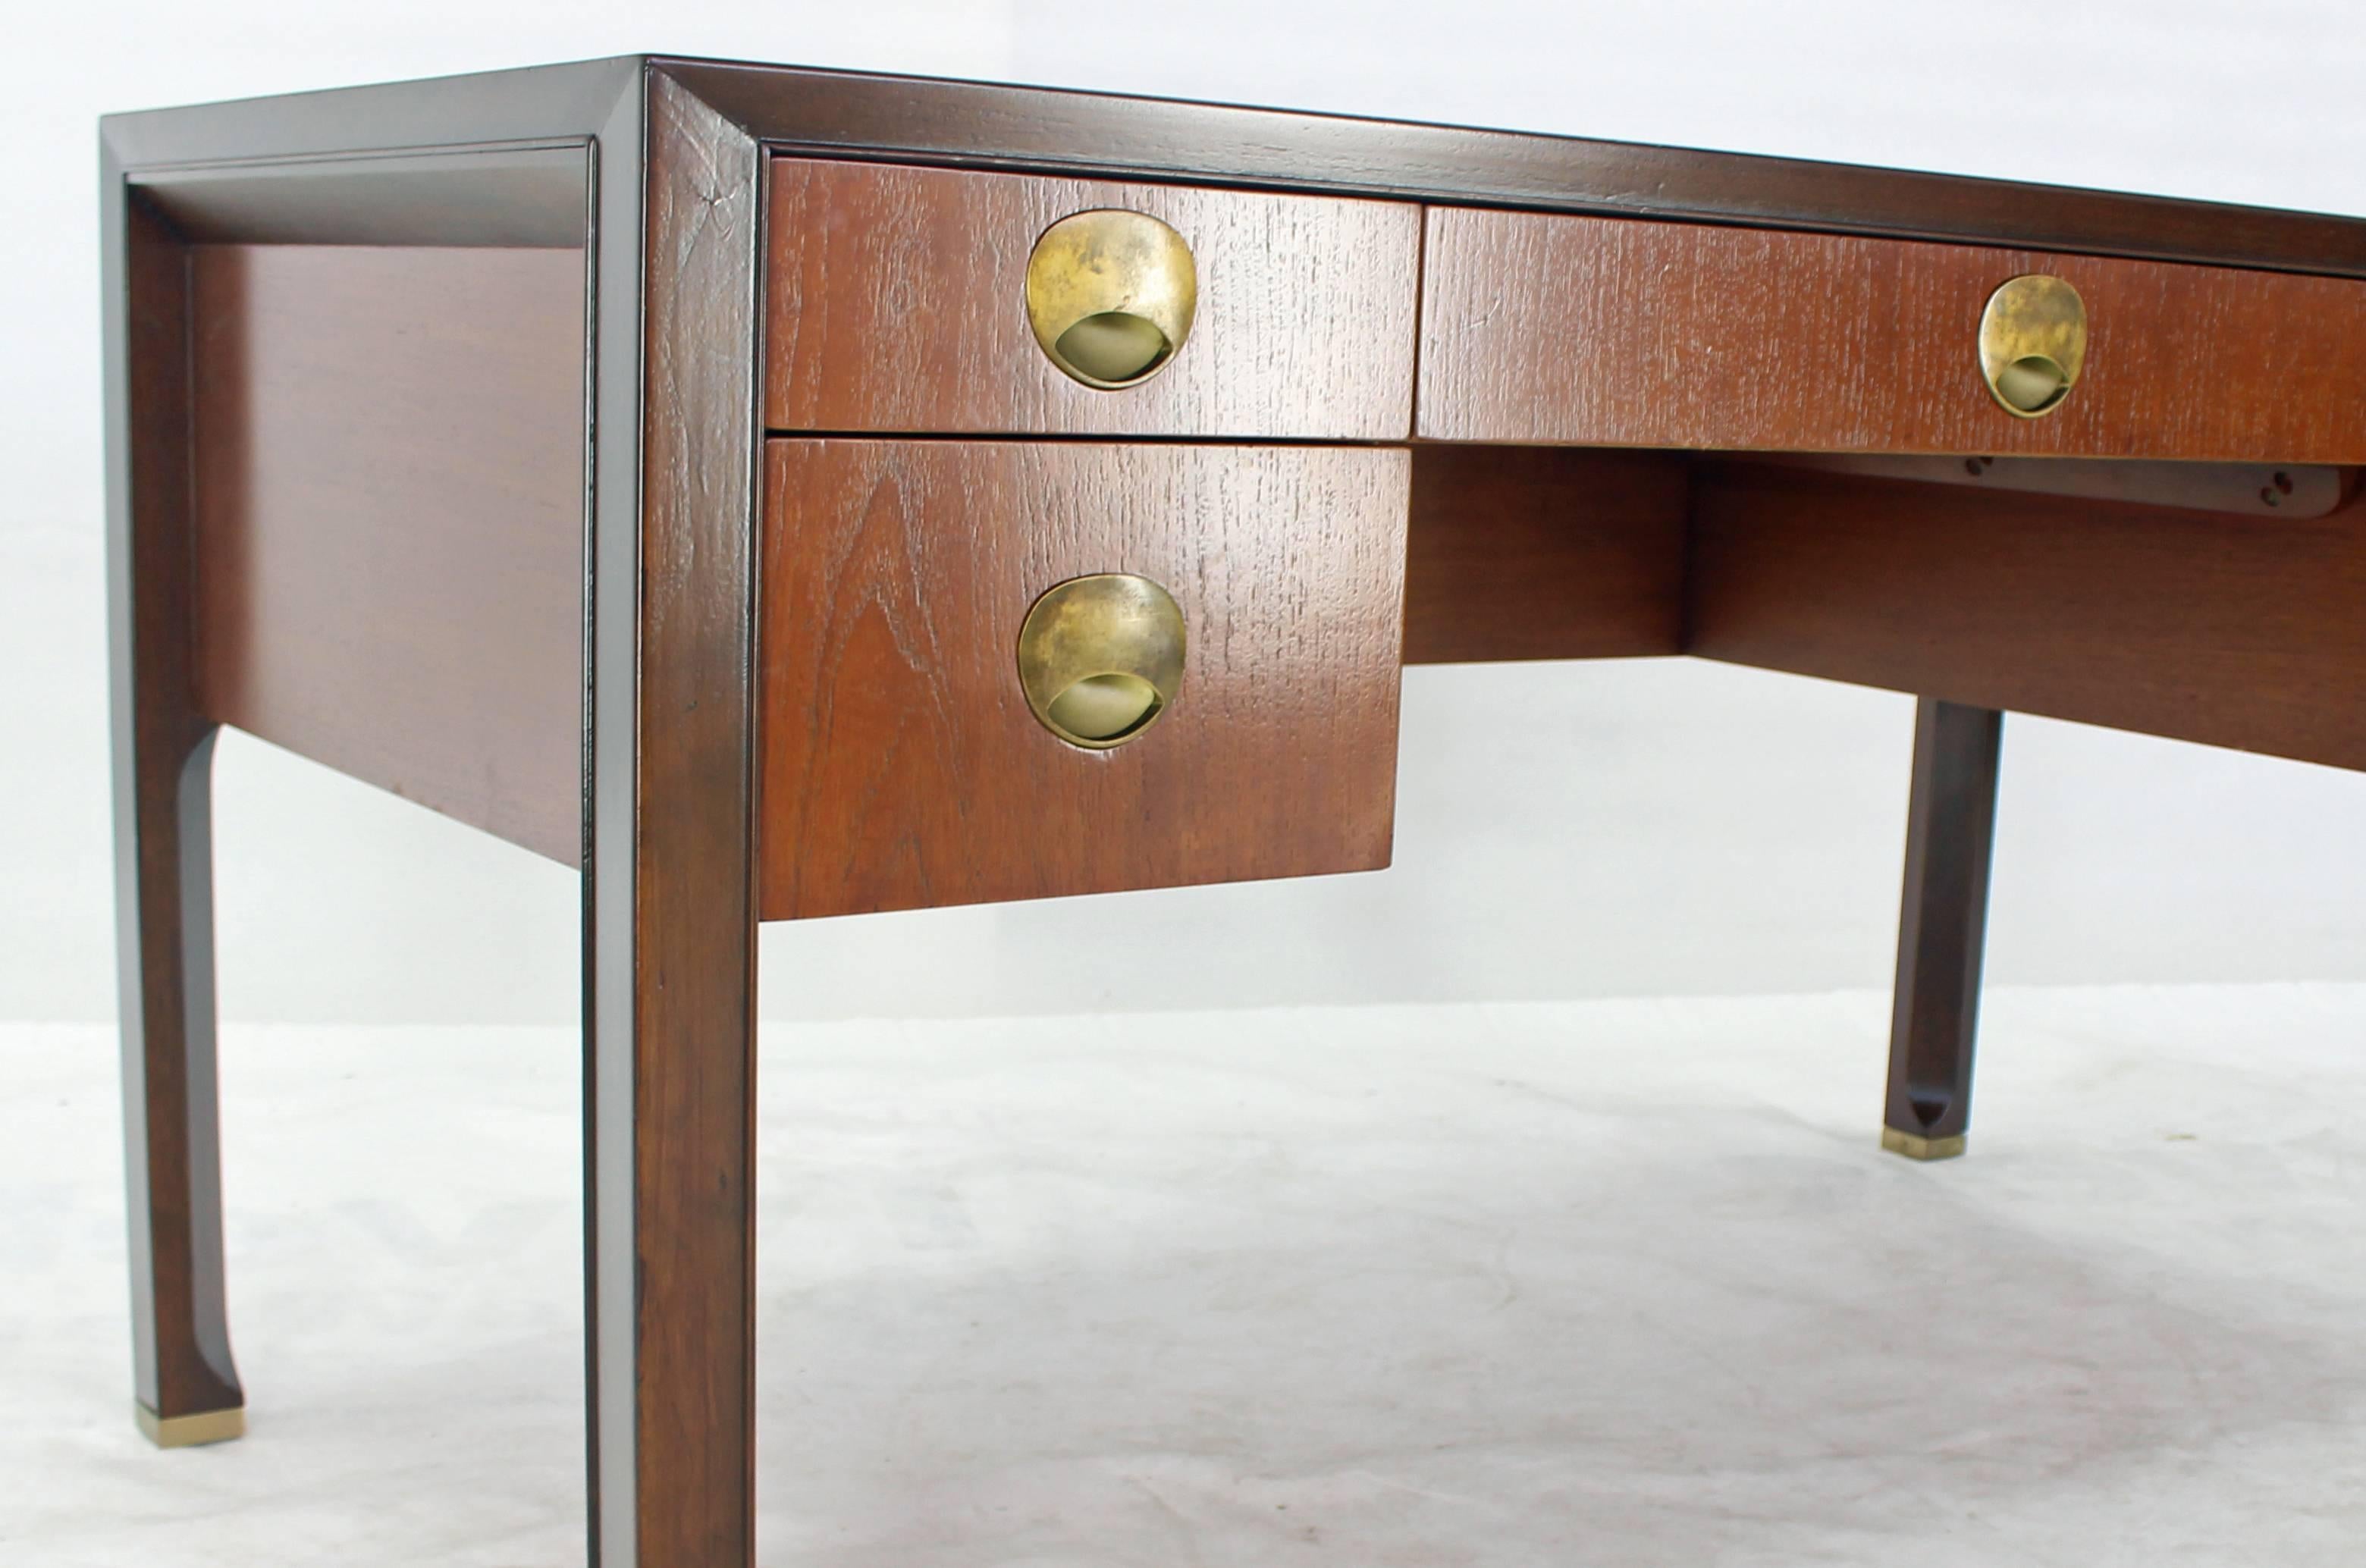 Mid-Century Modern teak walnut case leather top executive desk with brass pulls. Heavy solid brass feet tips. This is possibly Finn Juhl design desk.
       